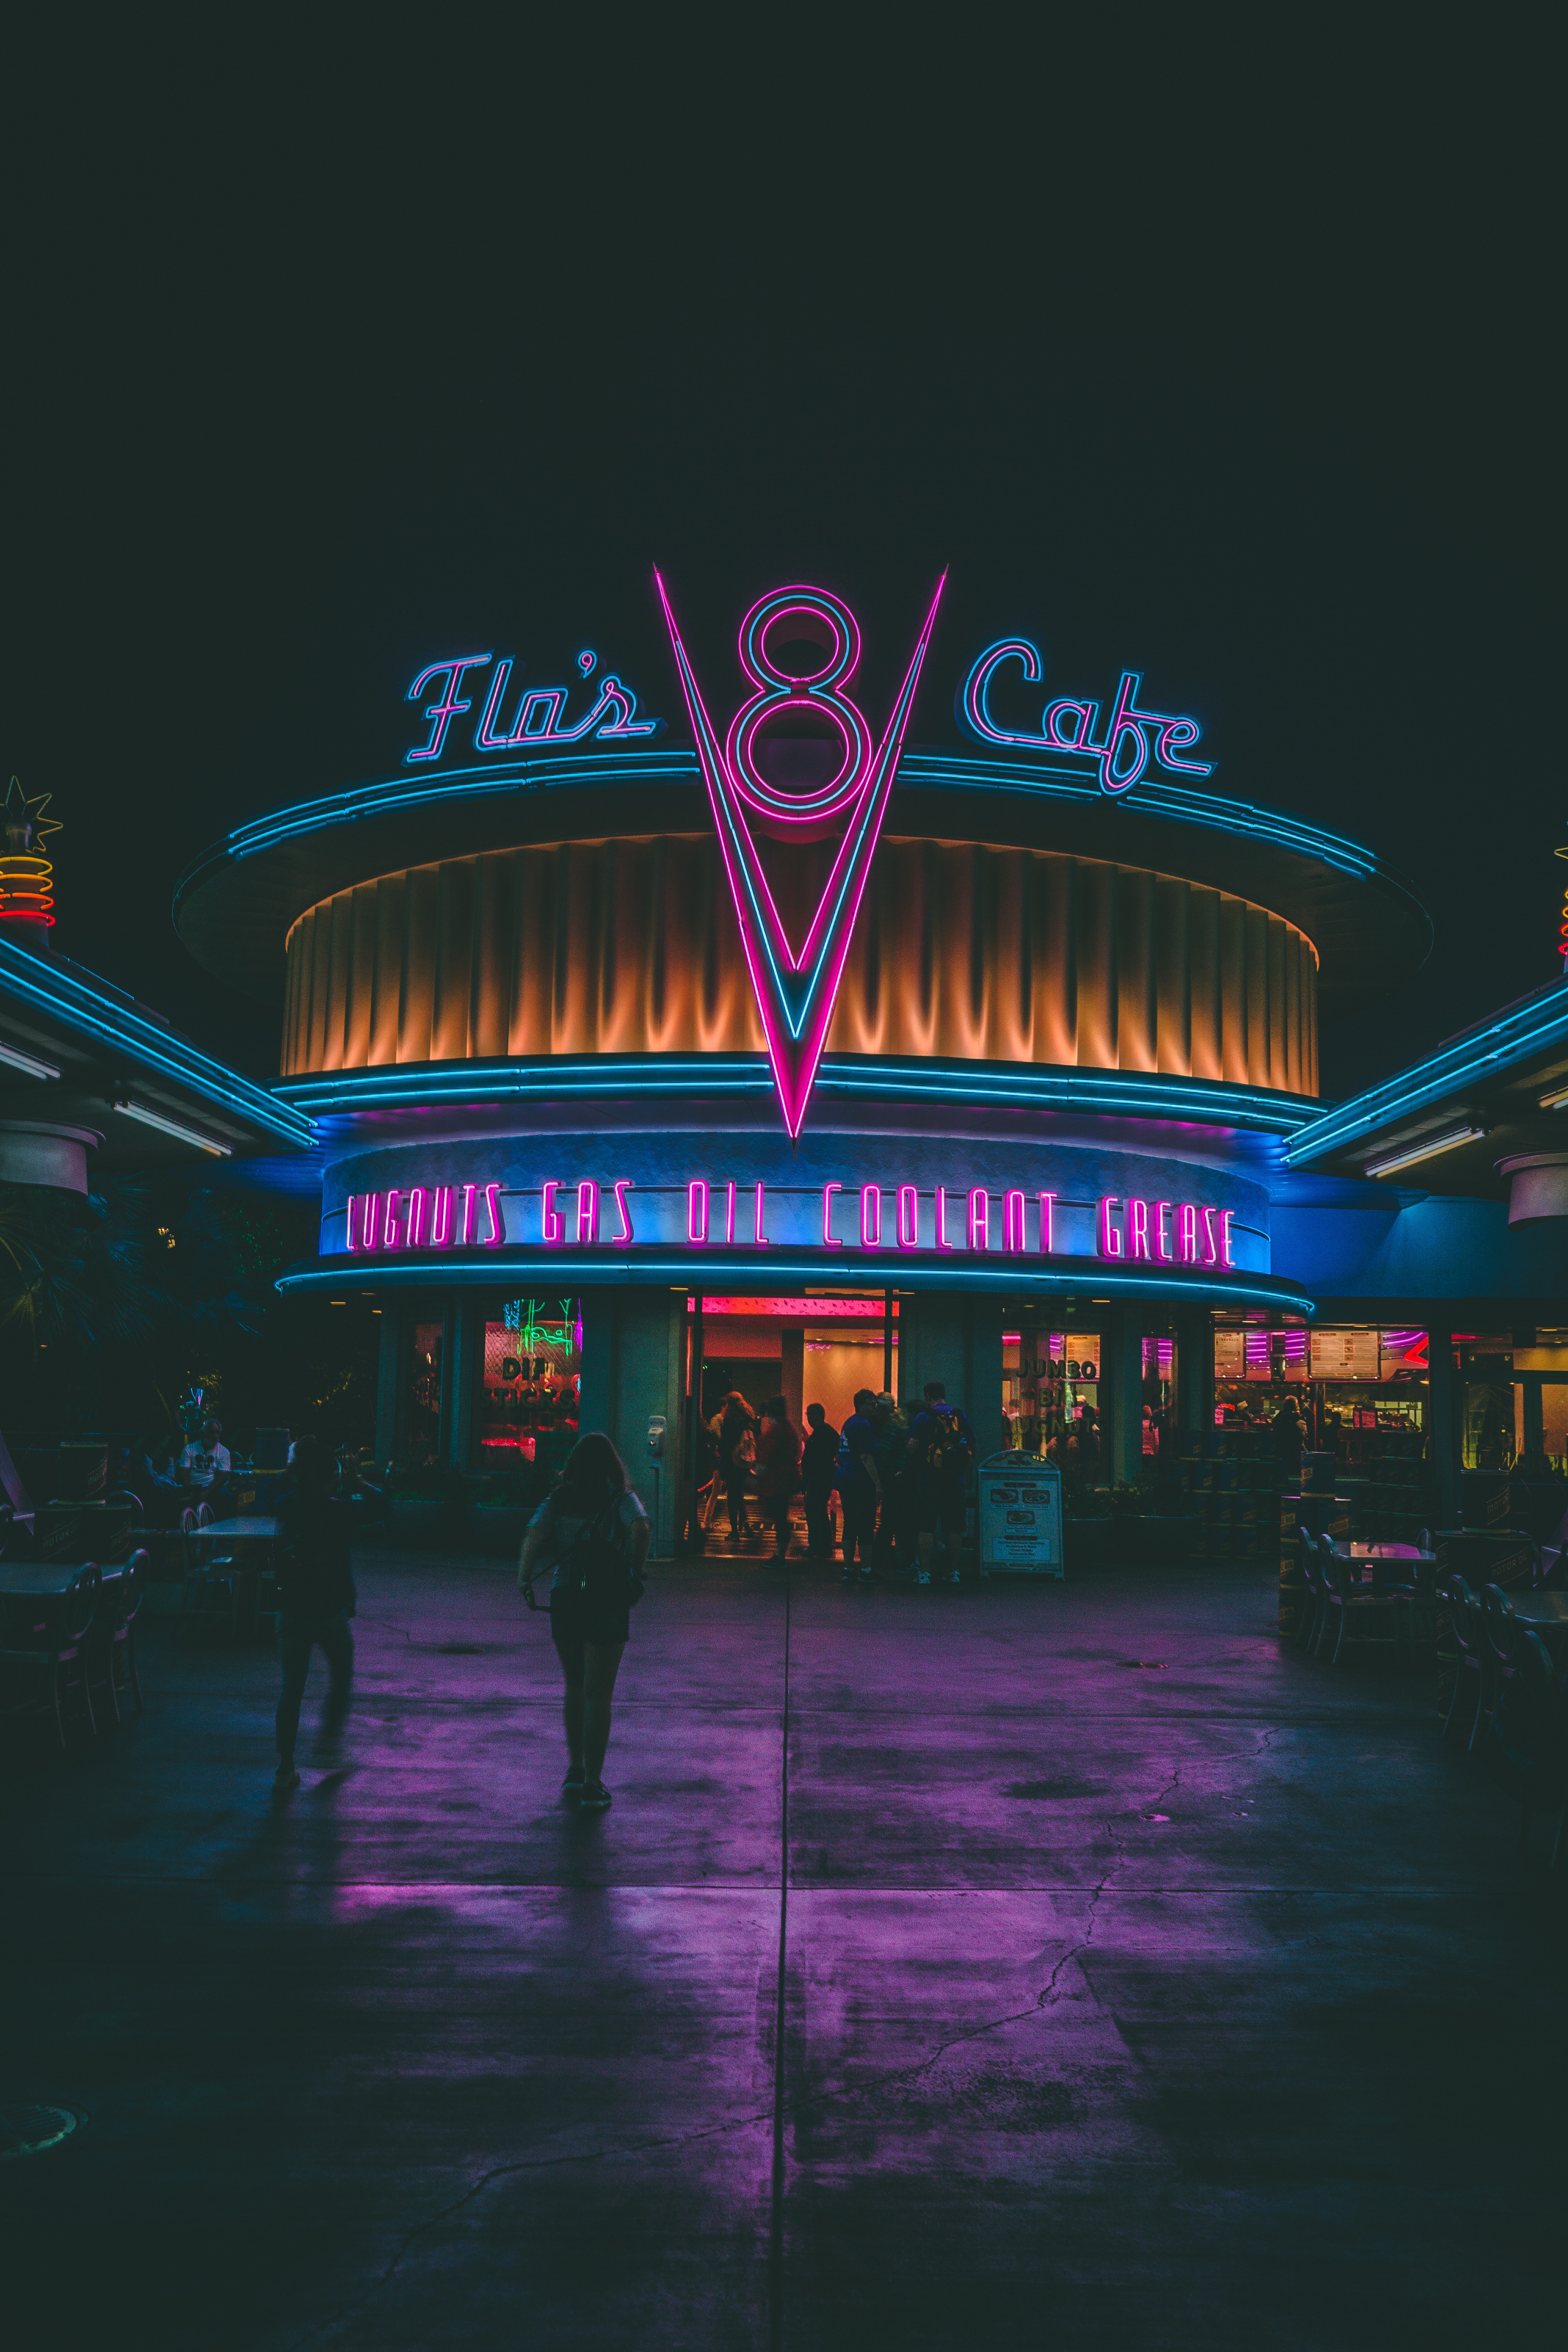 Neon City Photo, Download The BEST Free Neon City & HD Image